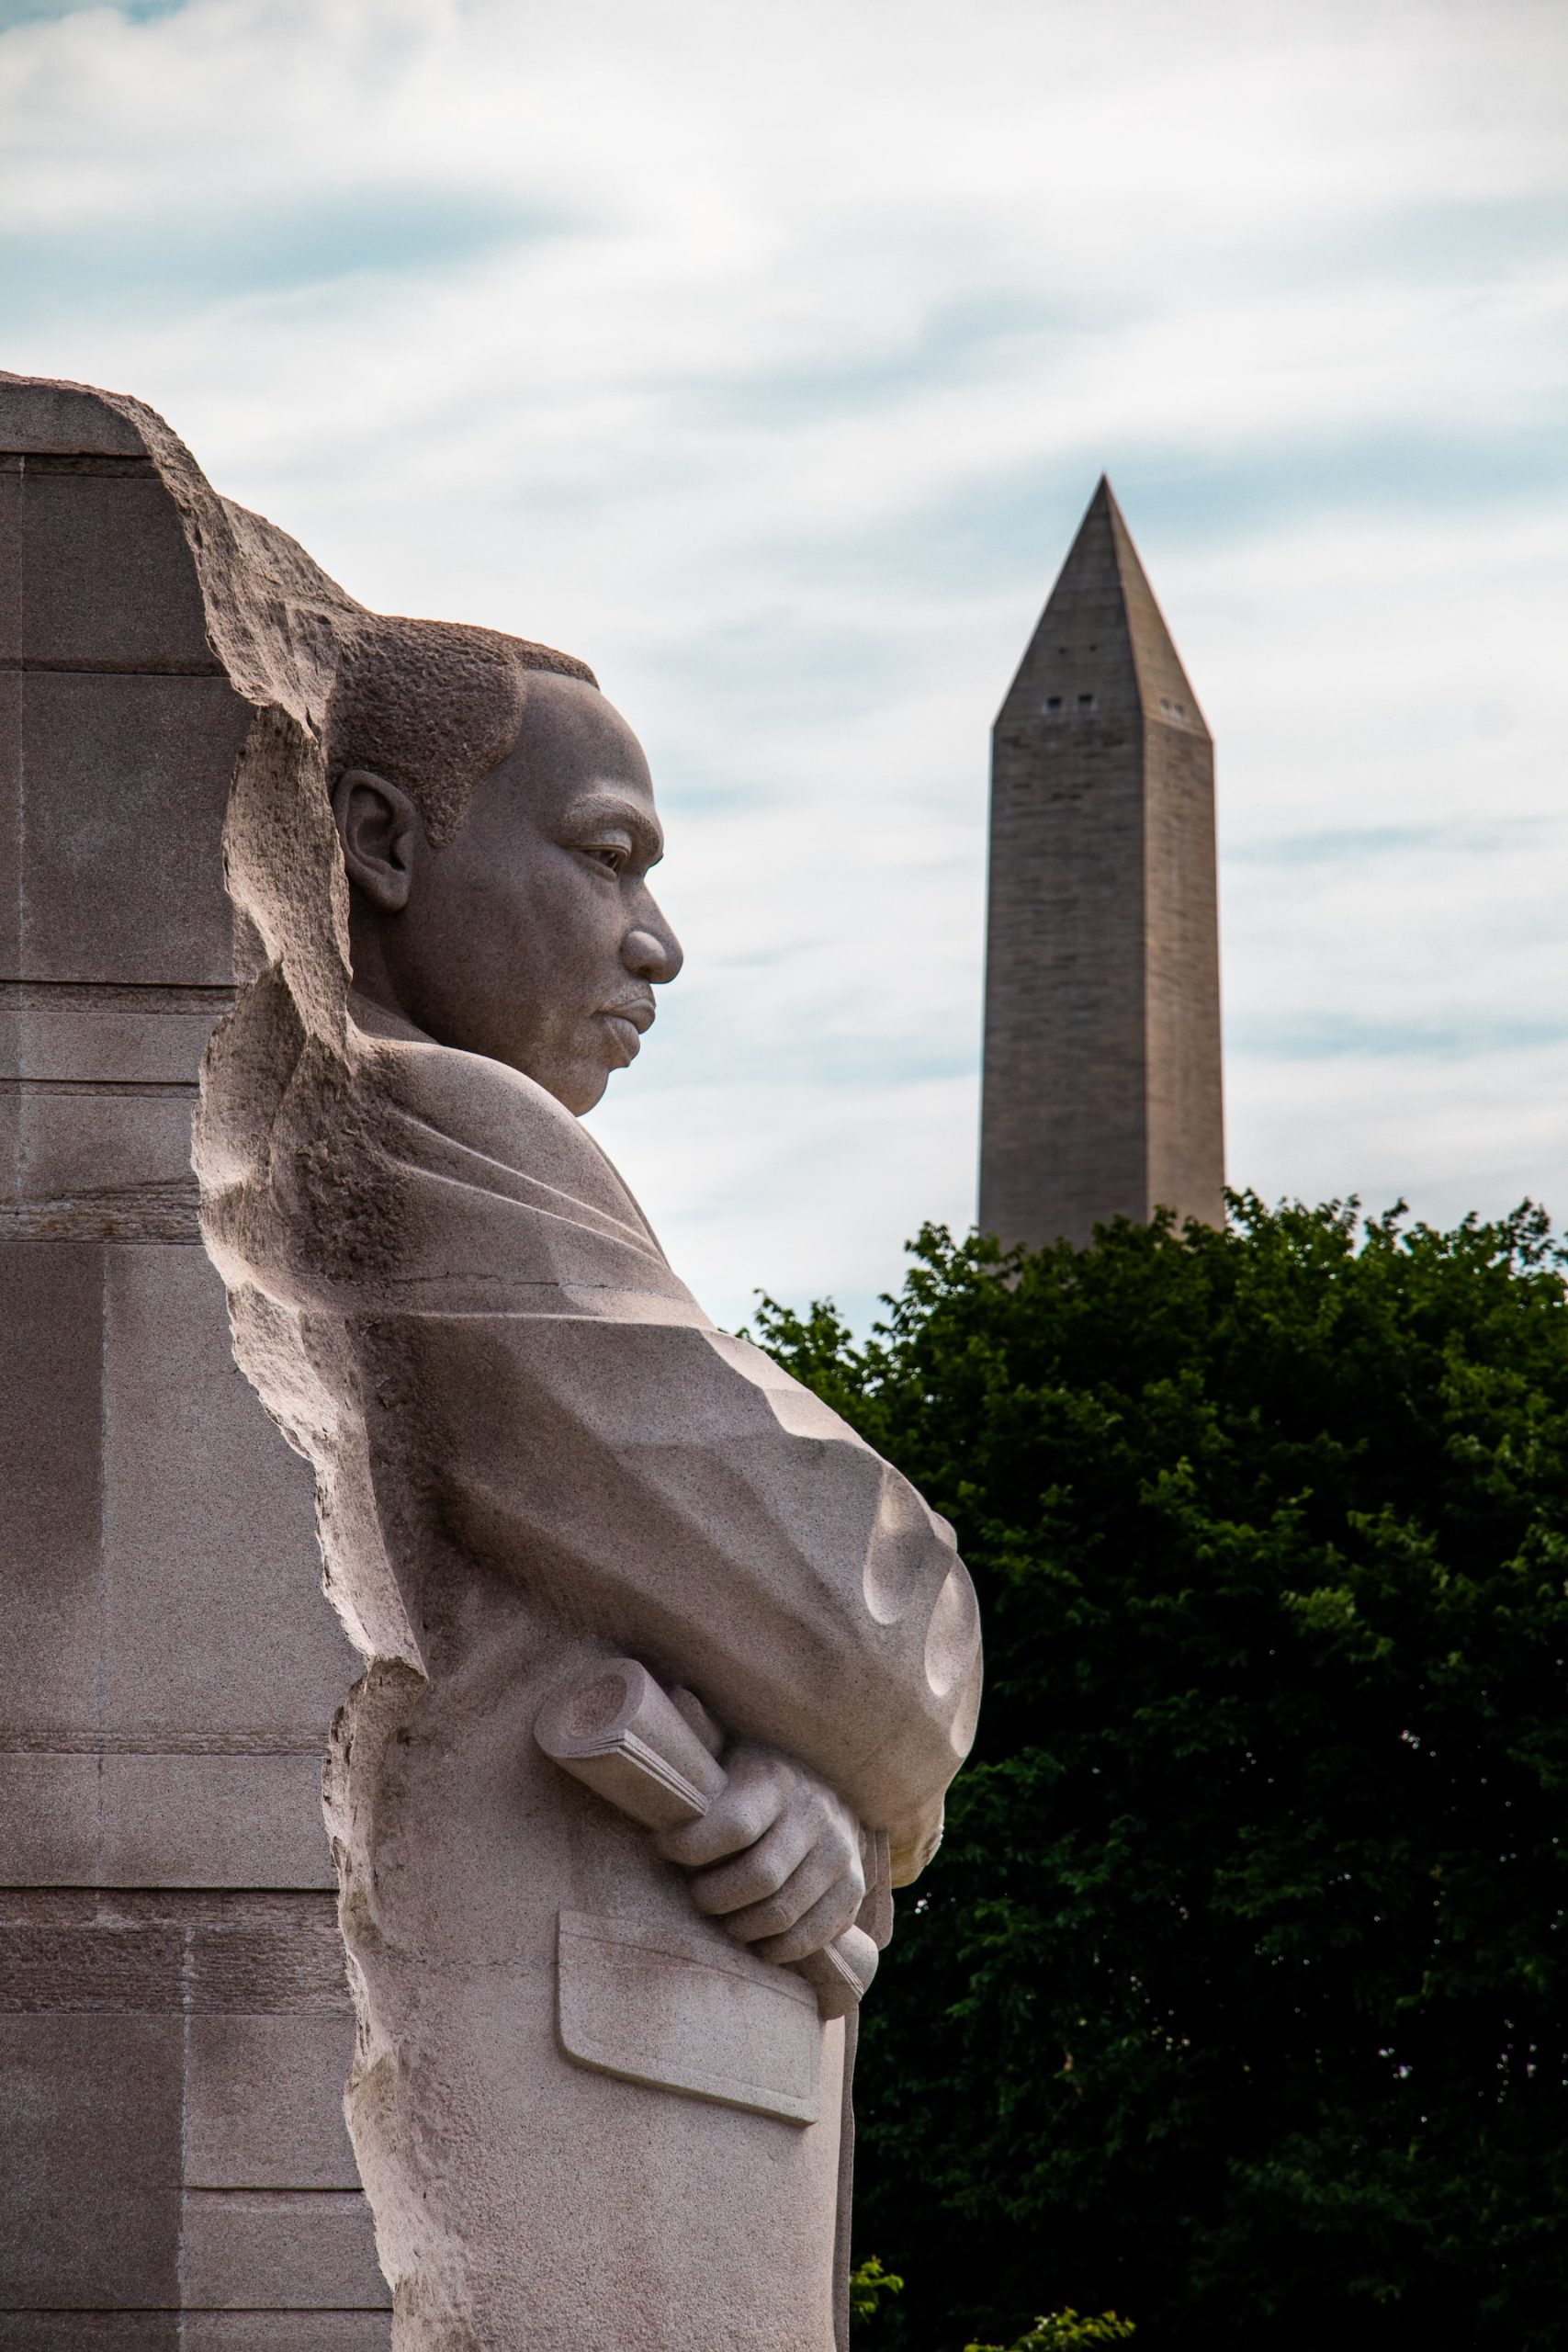 19: This Month in Black History – “Honoring Martin Luther King Jr.”